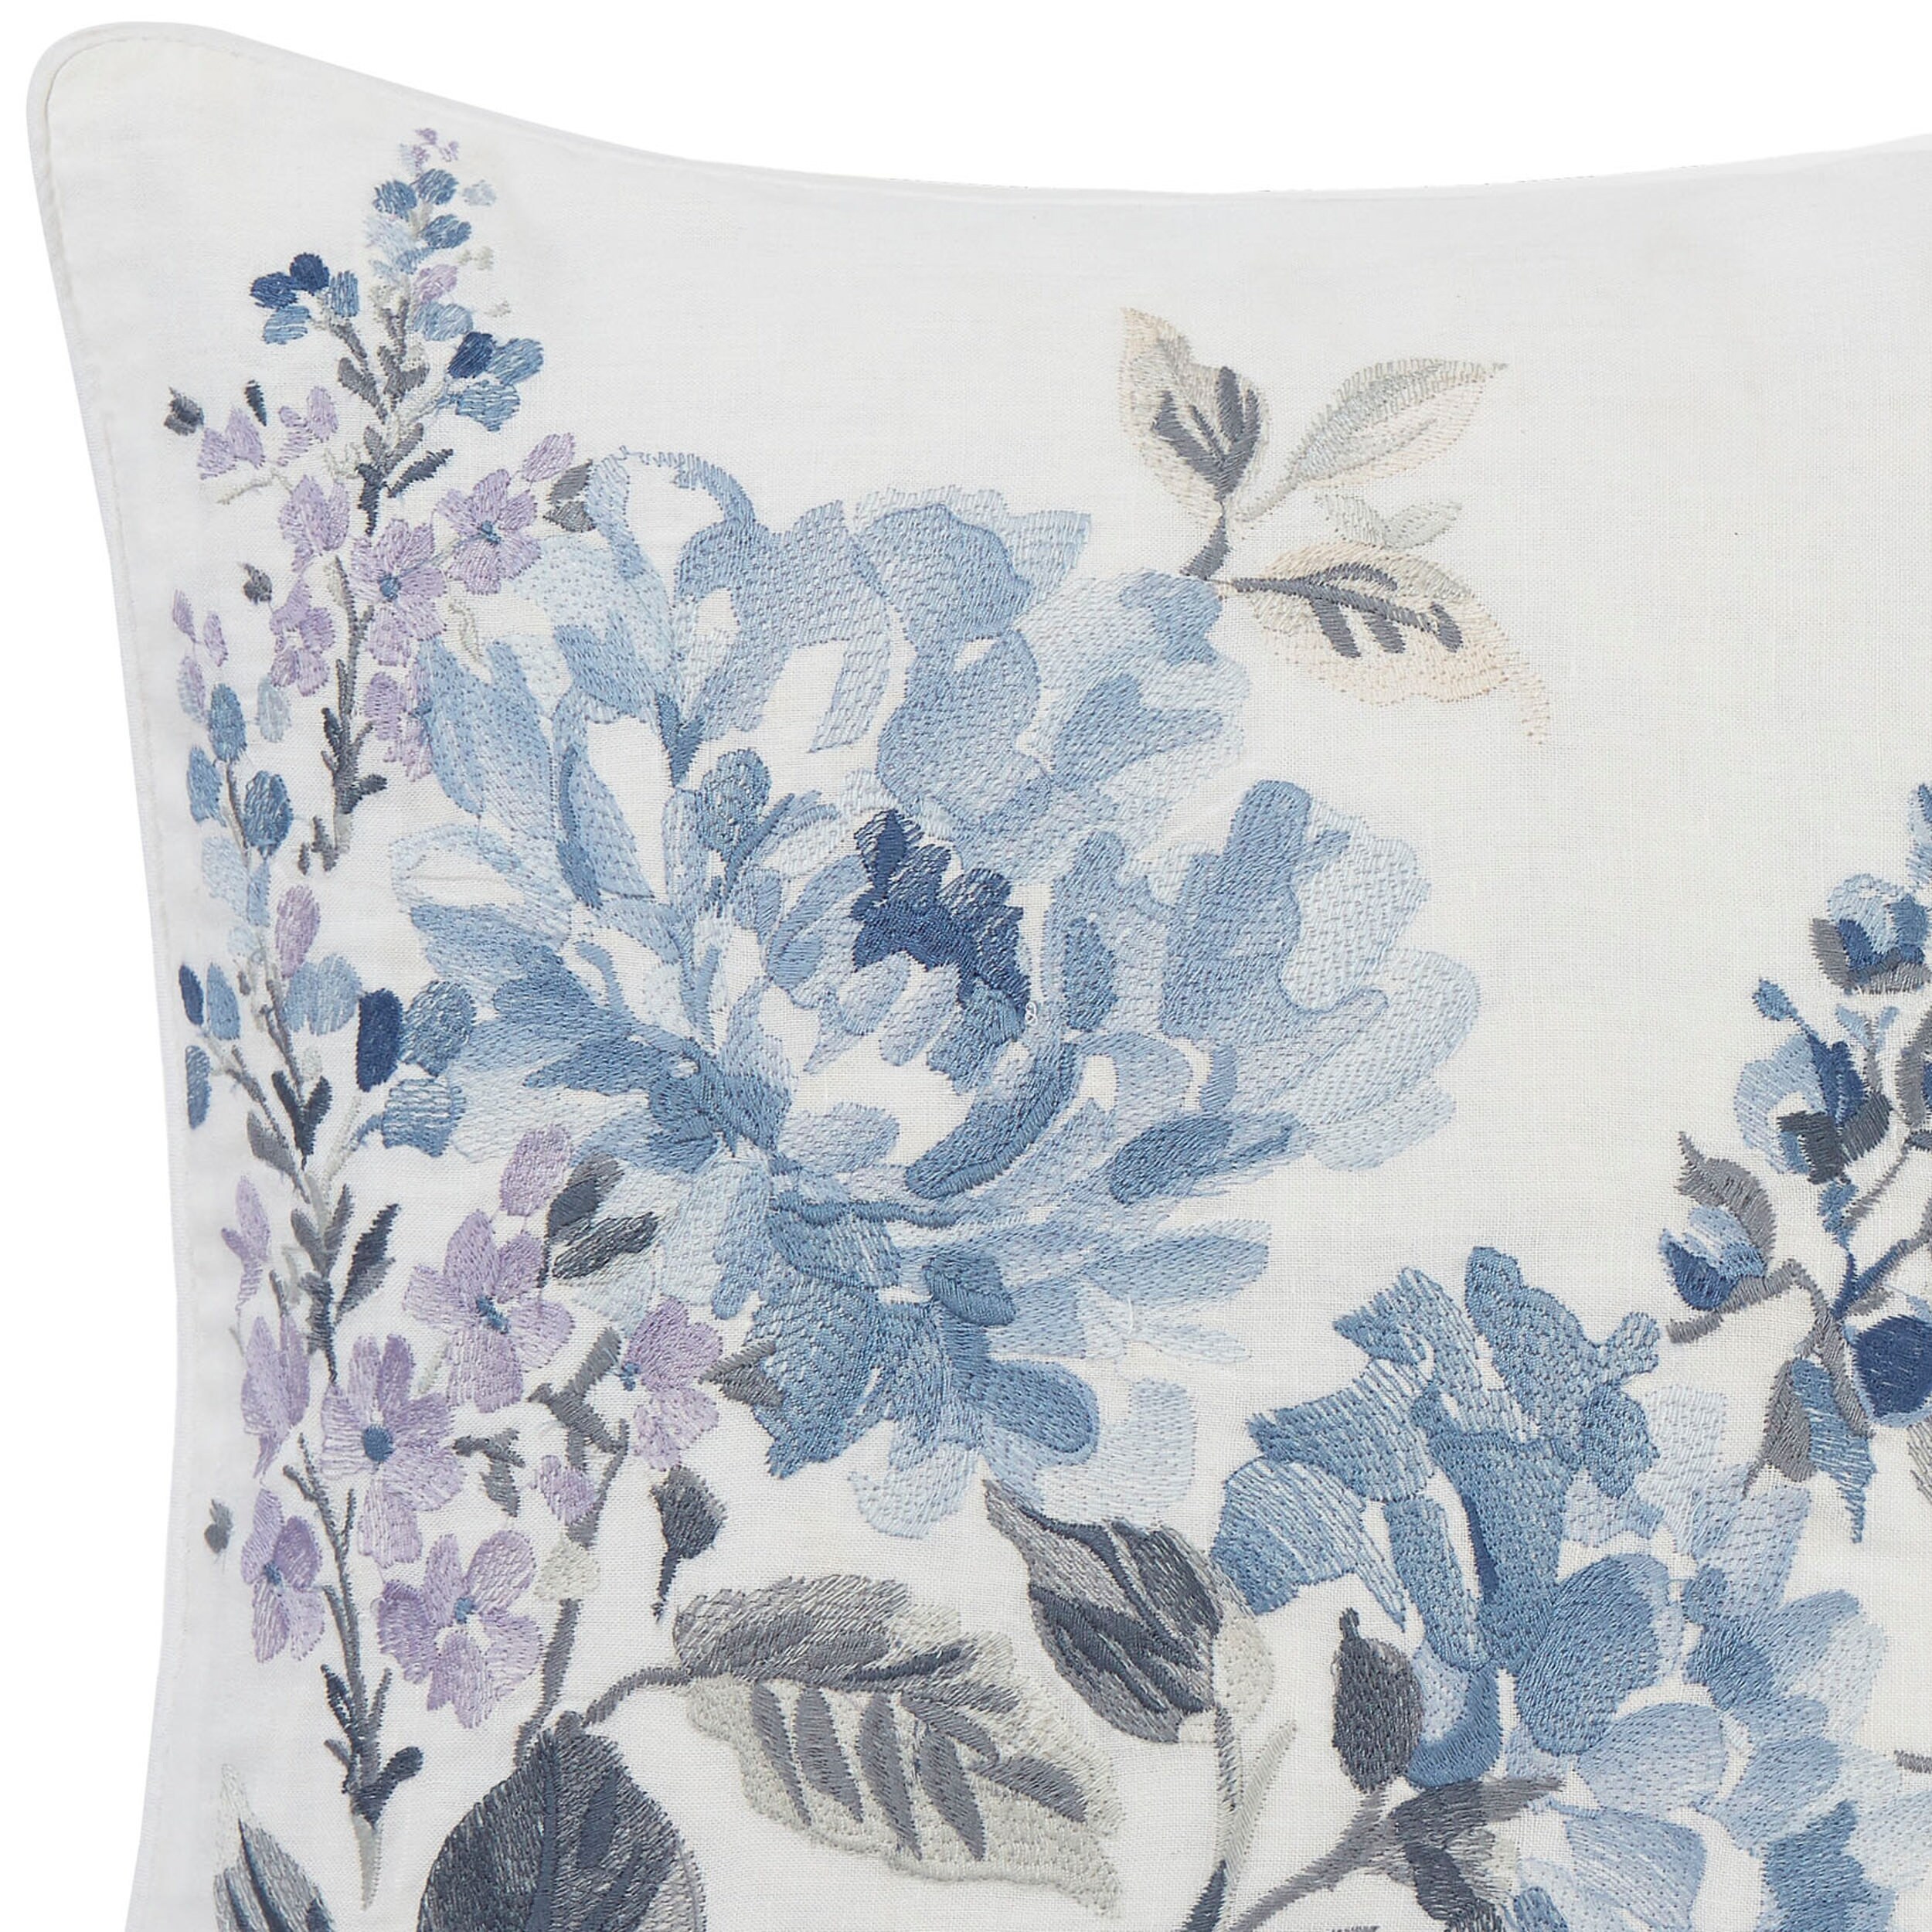 https://ak1.ostkcdn.com/images/products/is/images/direct/6f285c48ee33609223b6eb9ab8a0bcfa1921e7d6/Laura-Ashley-Chloe-Floral-Embroidered-Throw-Pillow.jpg